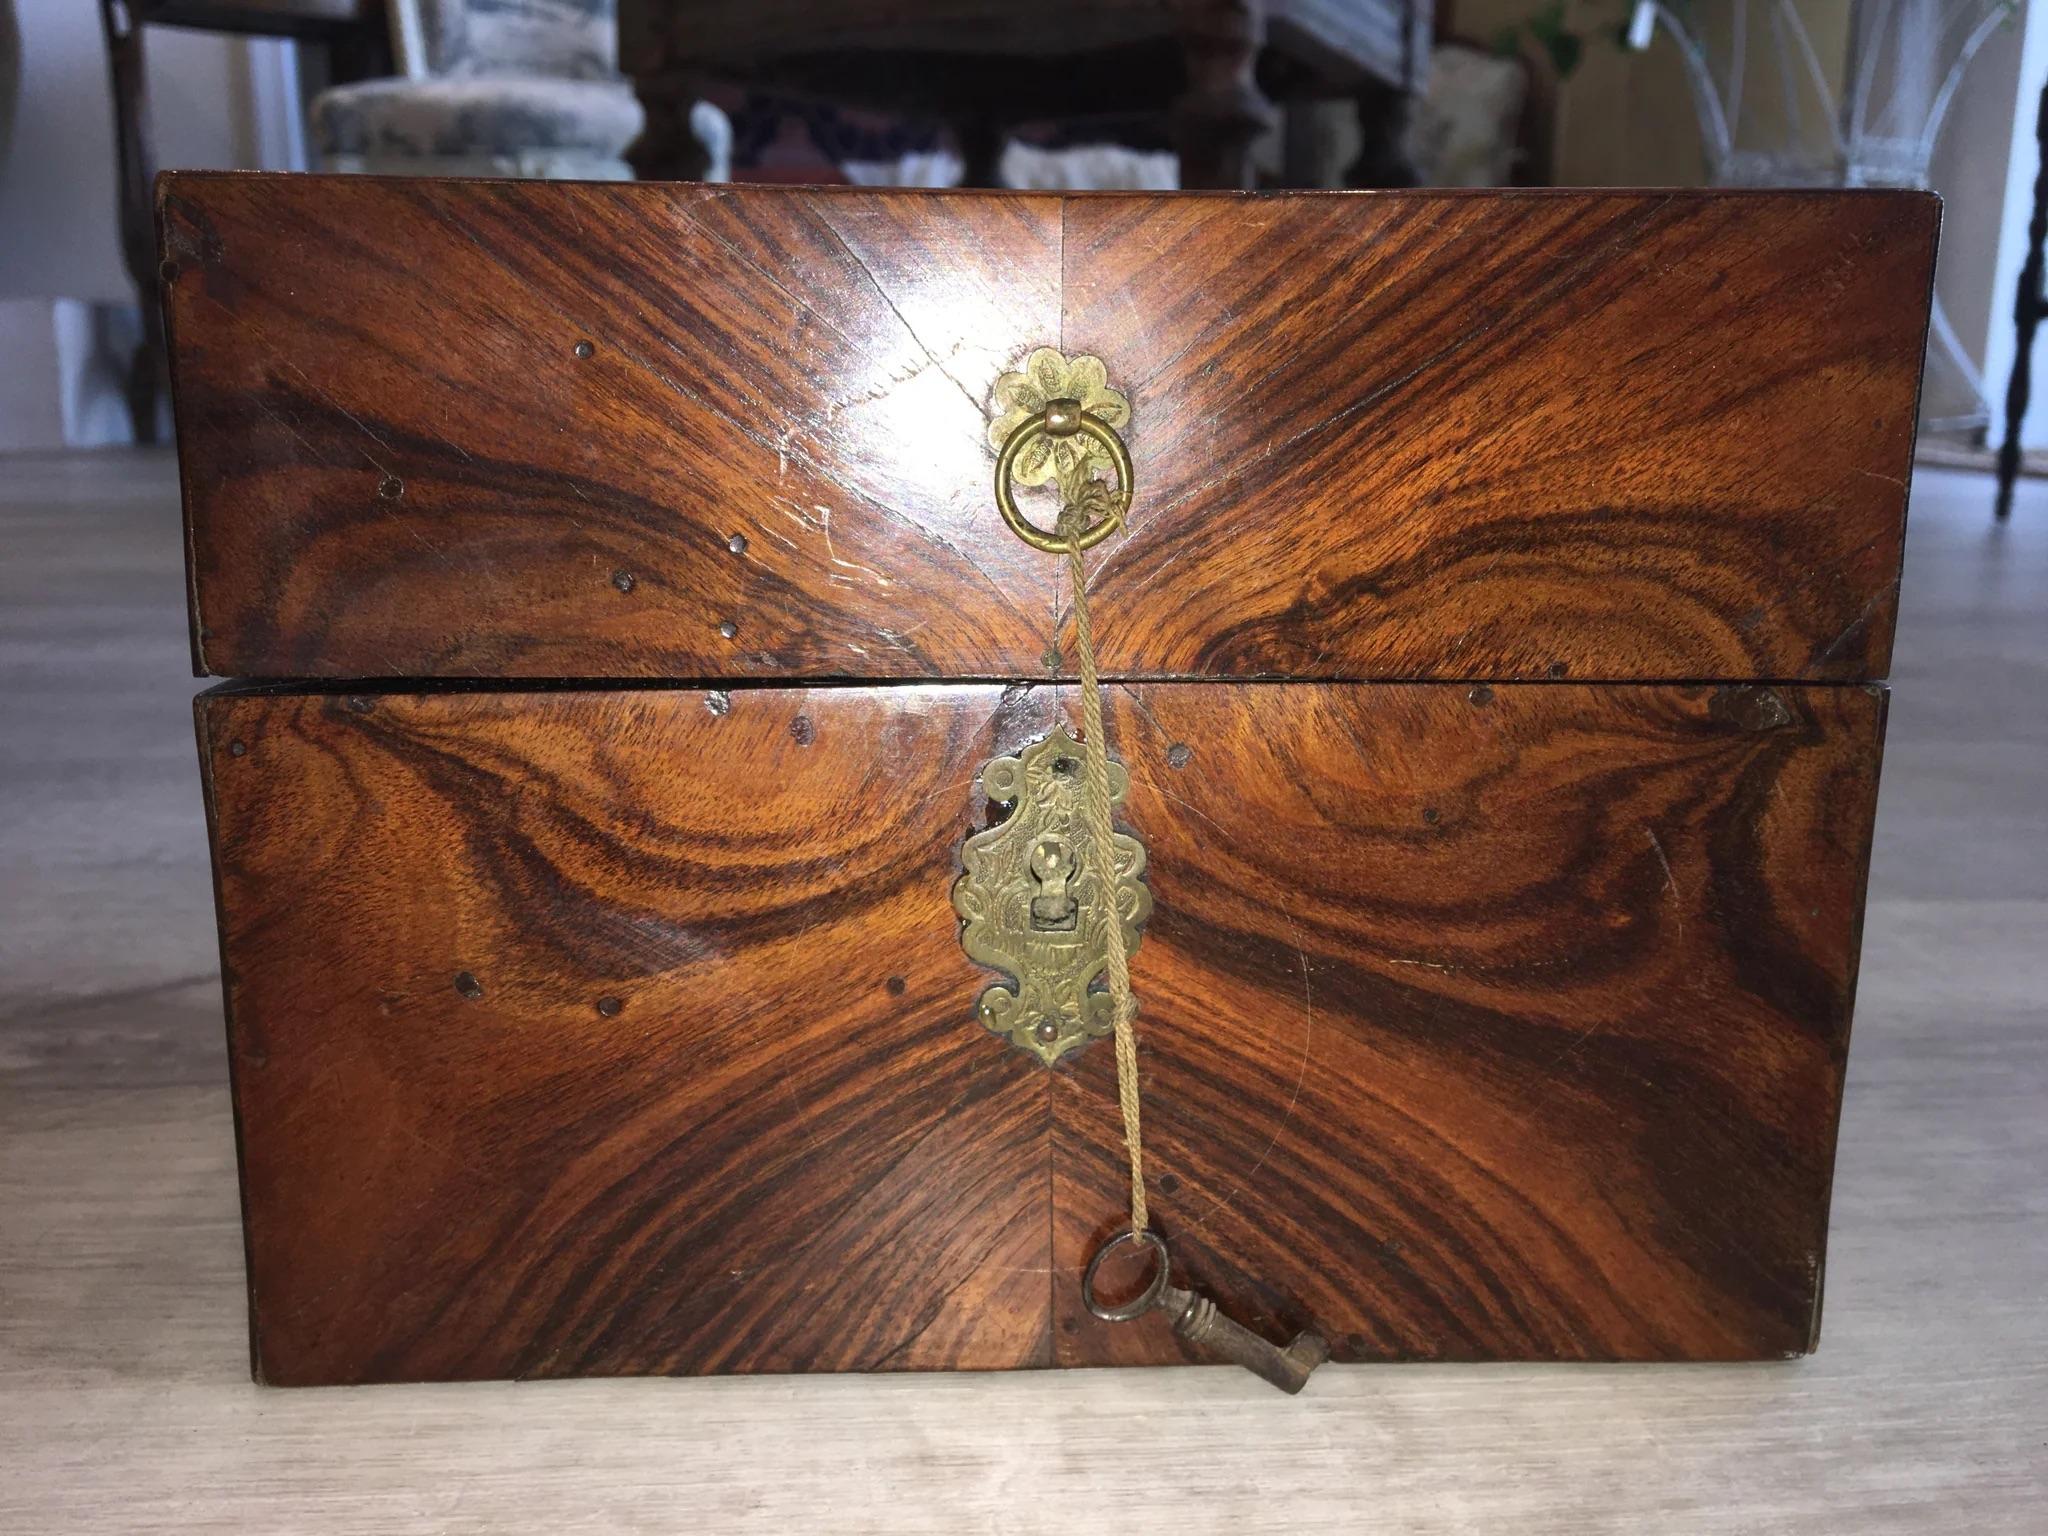 Rare 18th Century Travel Perfume Box, coffret parfumeur a odeur, Louis XV. Beautifully figured Rosewood with geometric inlay to the lid of tropical woods, original key and original chased and detailed hinges and escutcheon. Original mirror to the